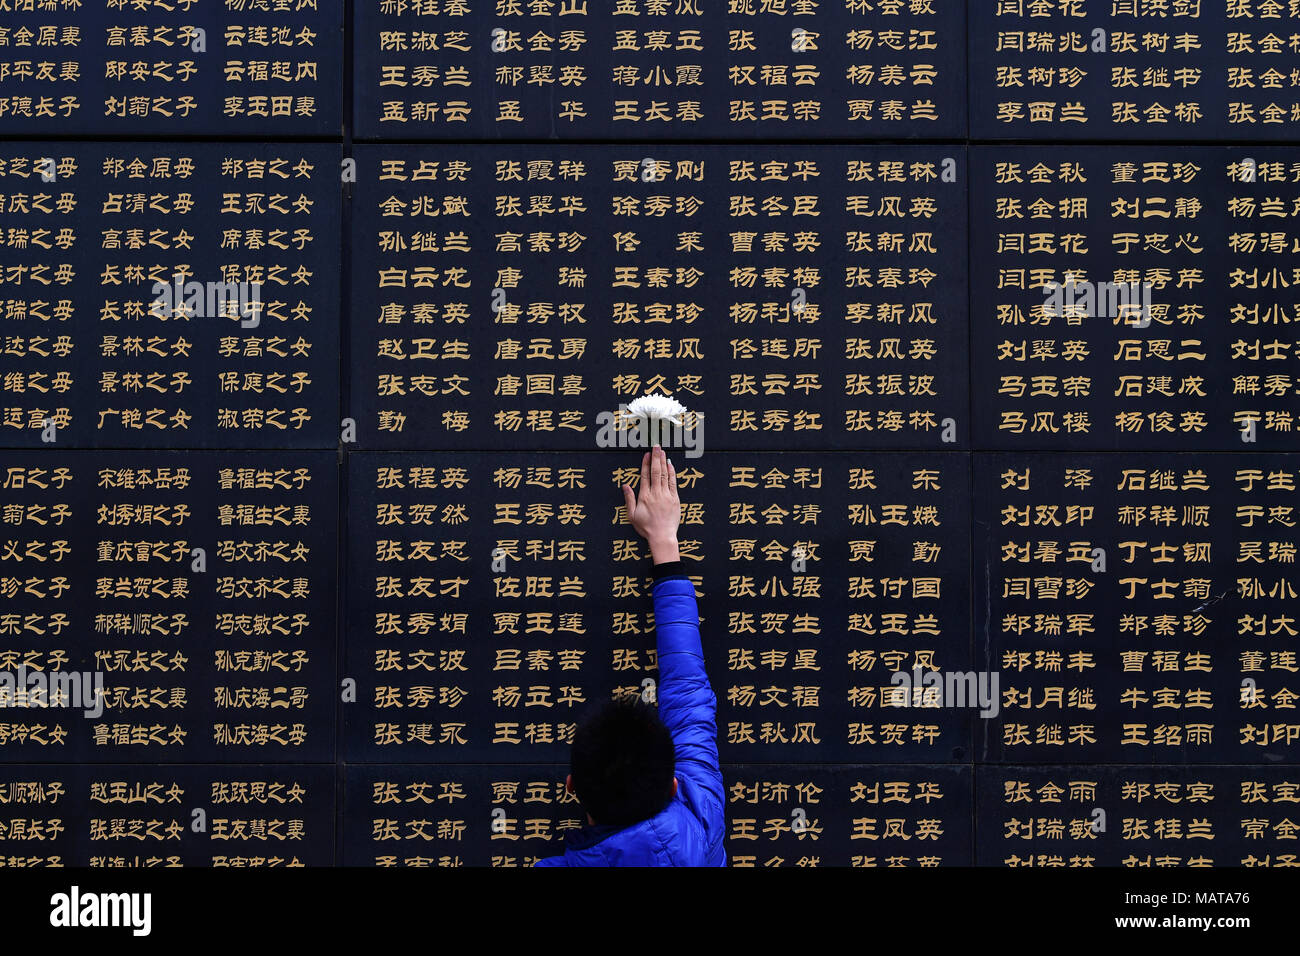 Tangshan. 4th Apr, 2018. A well-wisher attaches a white chrysanthemum to a memorial wall in remembrance of victims in the 1976 Tangshan Earthquake in Tangshan, north China's Hebei Province, on April 4, 2018, one day before the Qingming Festival when the deceased are commemorated. Credit: Dong Jun/Xinhua/Alamy Live News Stock Photo